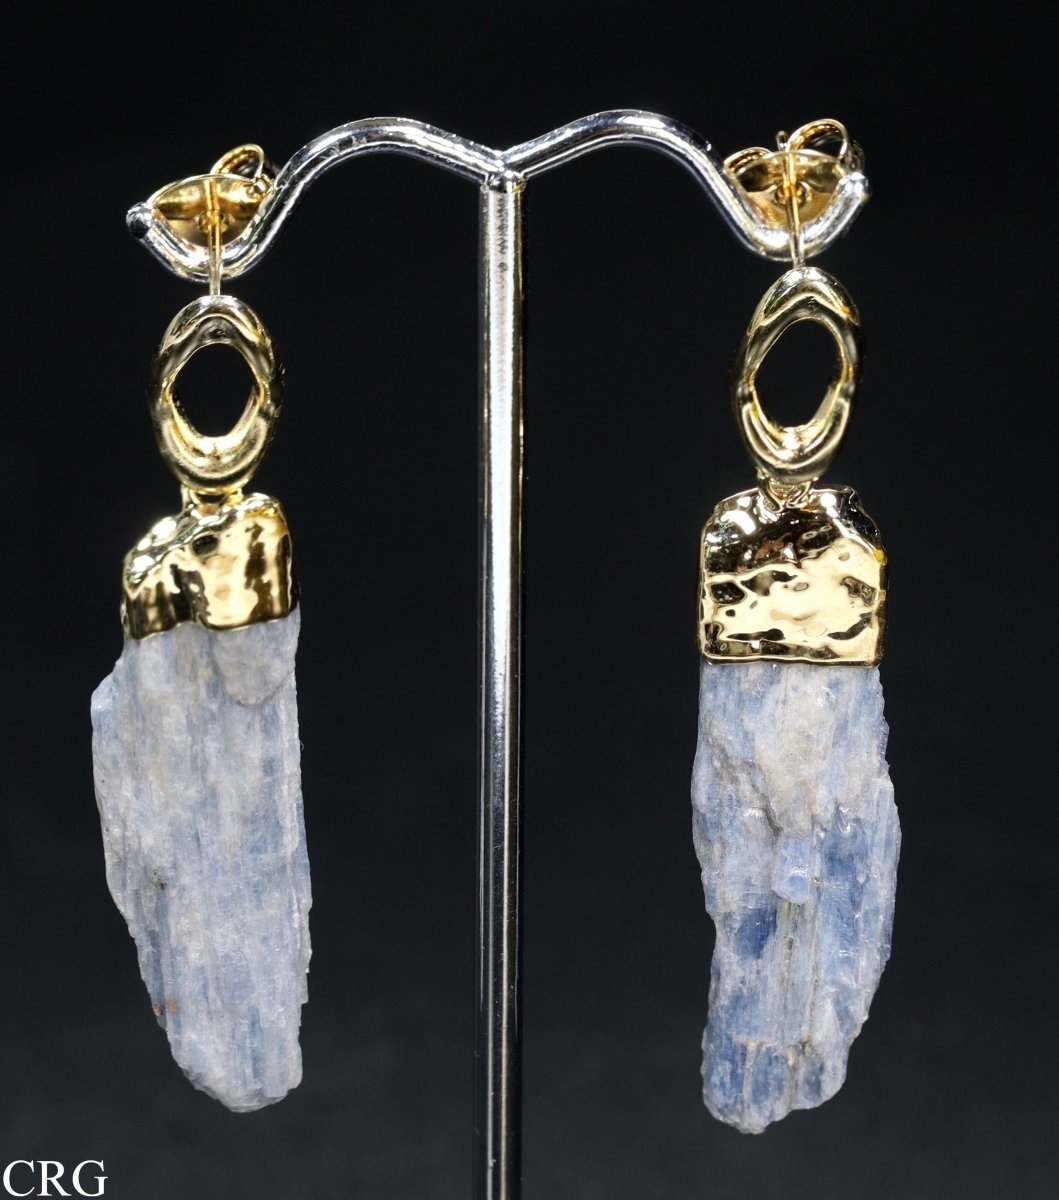 Blue Kyanite Toothpick Earrings with Gold Plating (2 Pieces) Size 1 to 2 Inches Crystal Jewelry